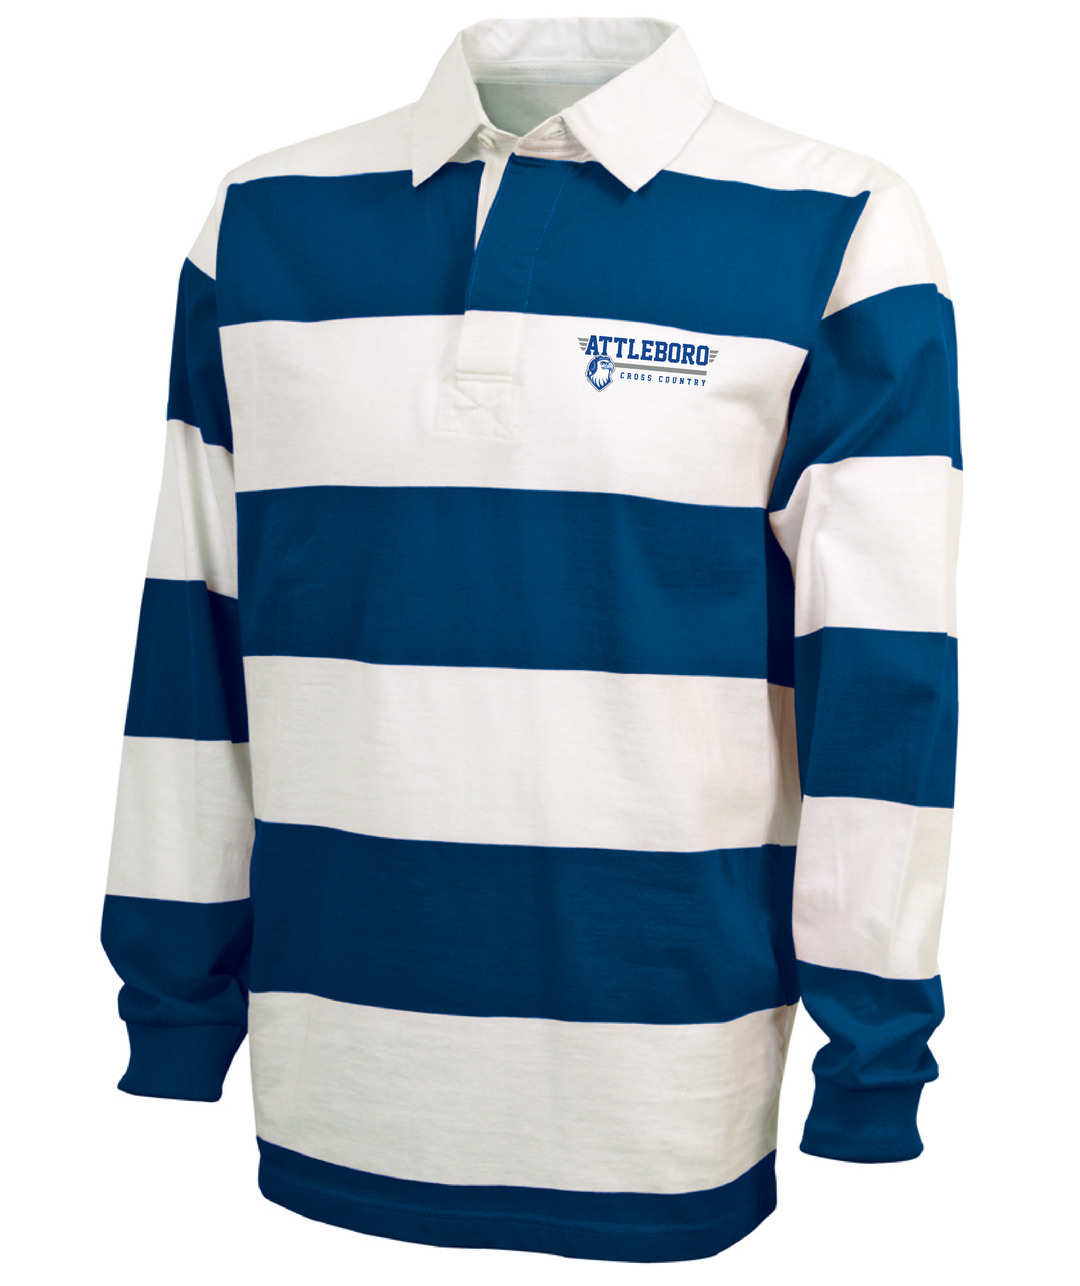 Attleboro Cross Country Unisex Classic Rugby Shirt (9278)